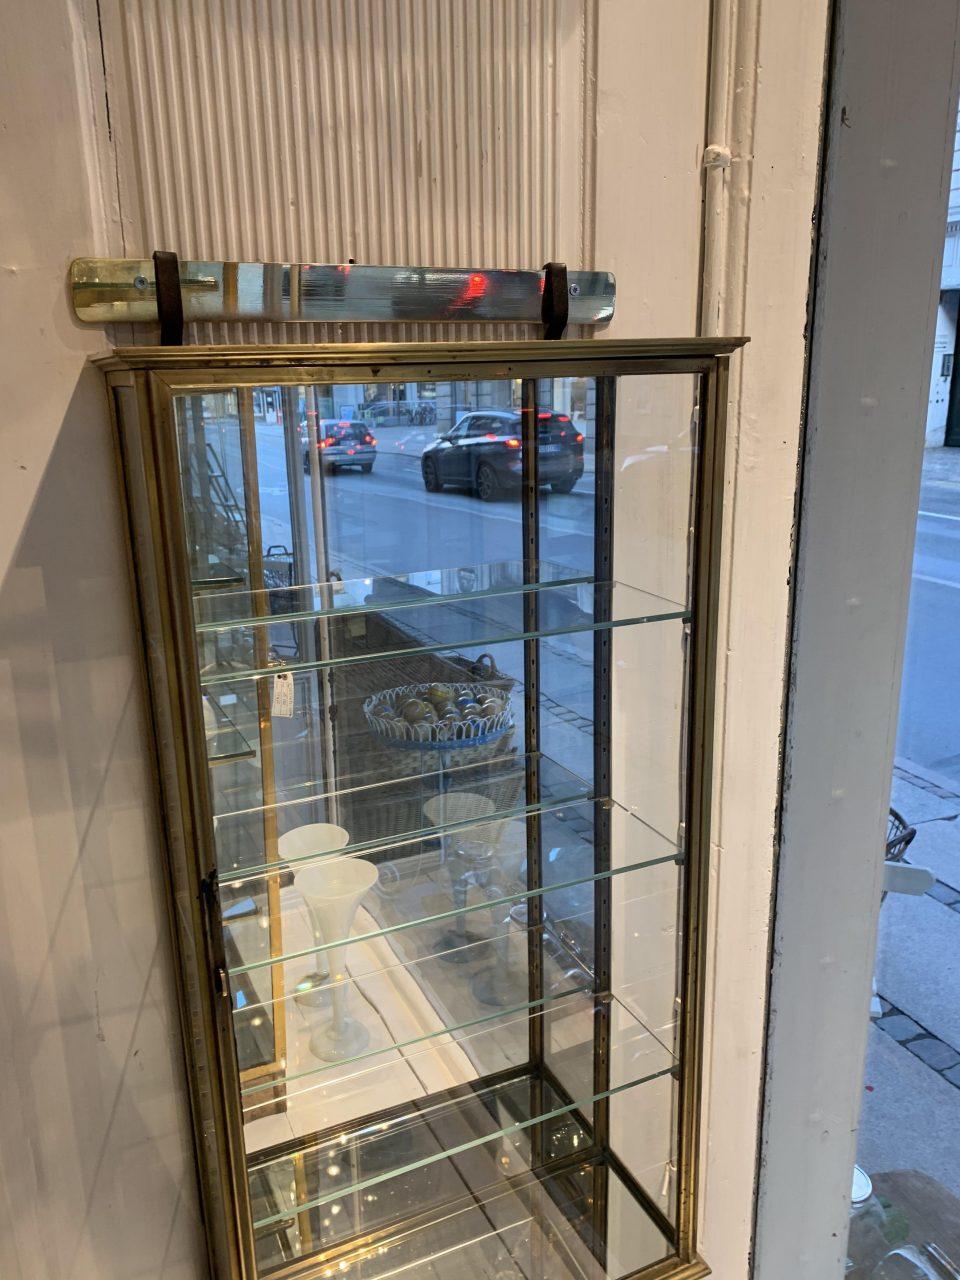 Elegant and presentable vintage brass display cabinet /vitrine, from circa 1910s-1920s France. 3 glass adjustable shelves and original mirrored cladding. This showcase was originally boutique inventory, and is in super condition.

The cabinet can